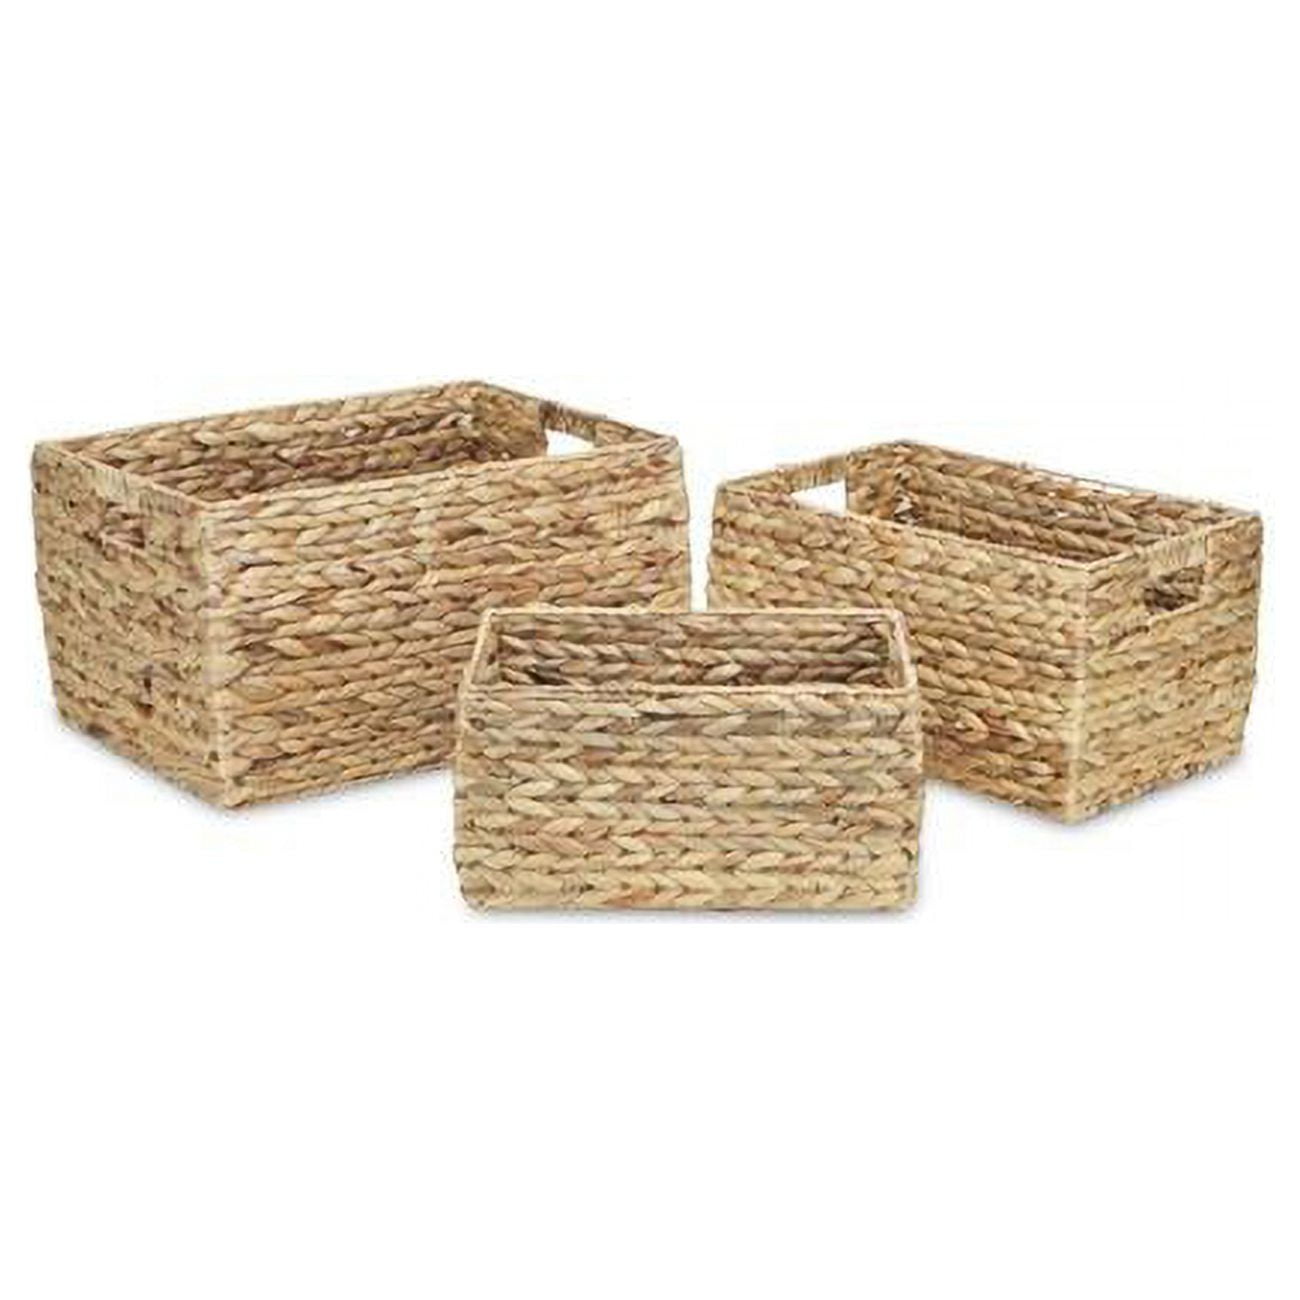 Picture of Cheungs 5467-3 Rectangular Water Hyacinth Basket with Round Edge - Set of 3